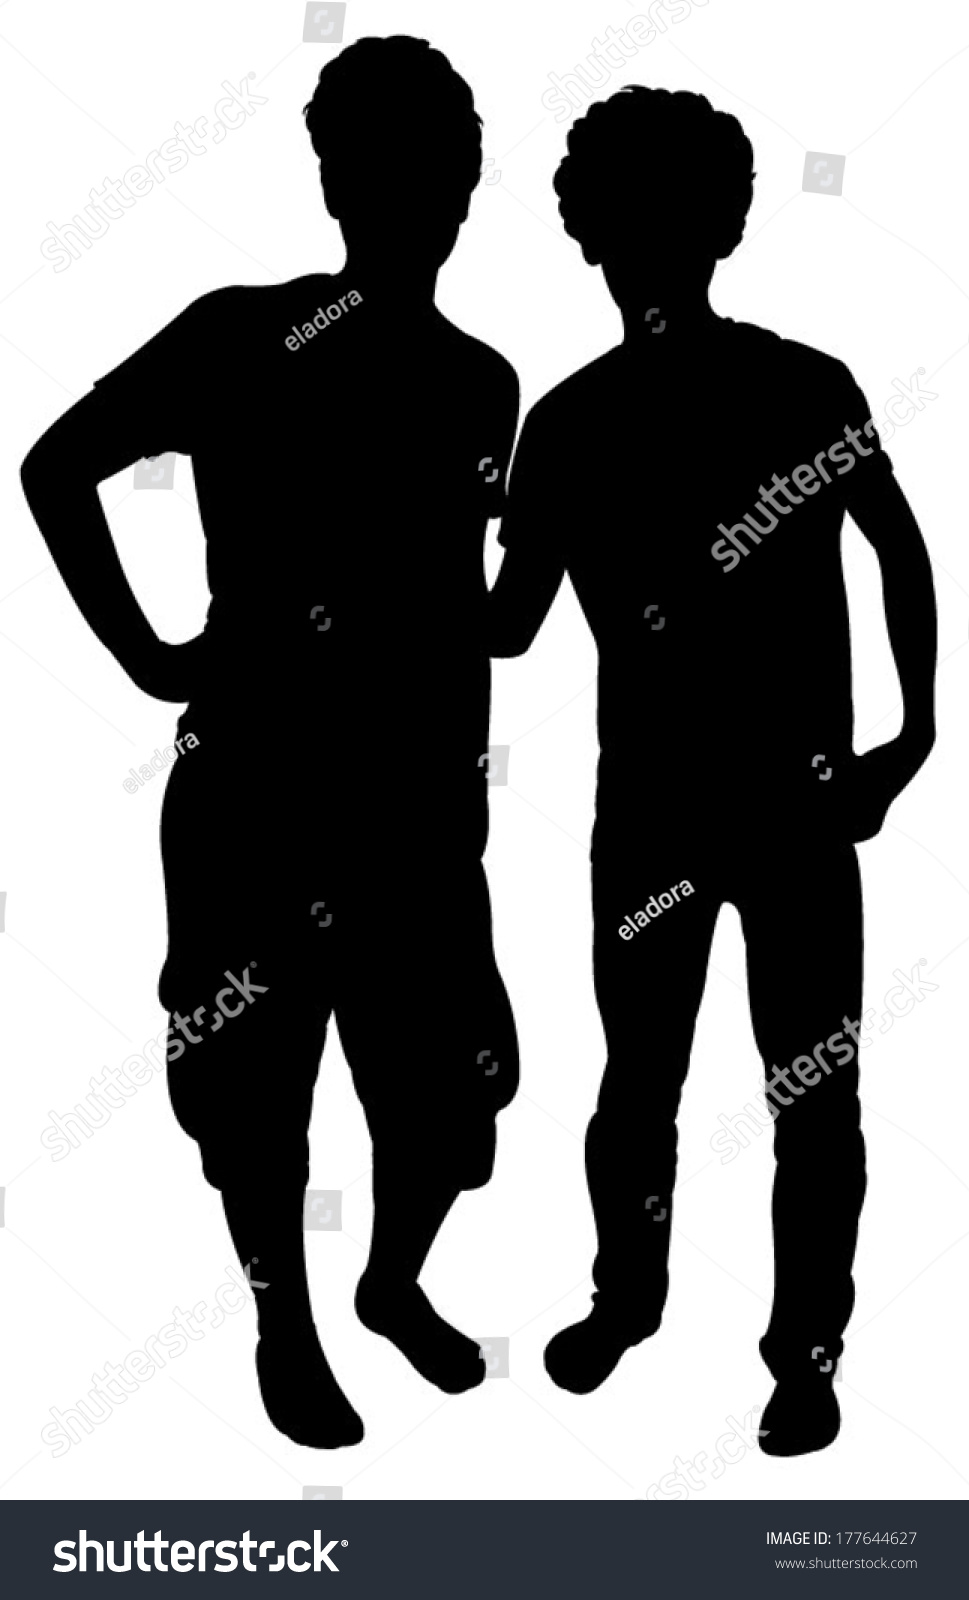 Friends Silhouette Vector Stock Vector (Royalty Free) 177644627 ...